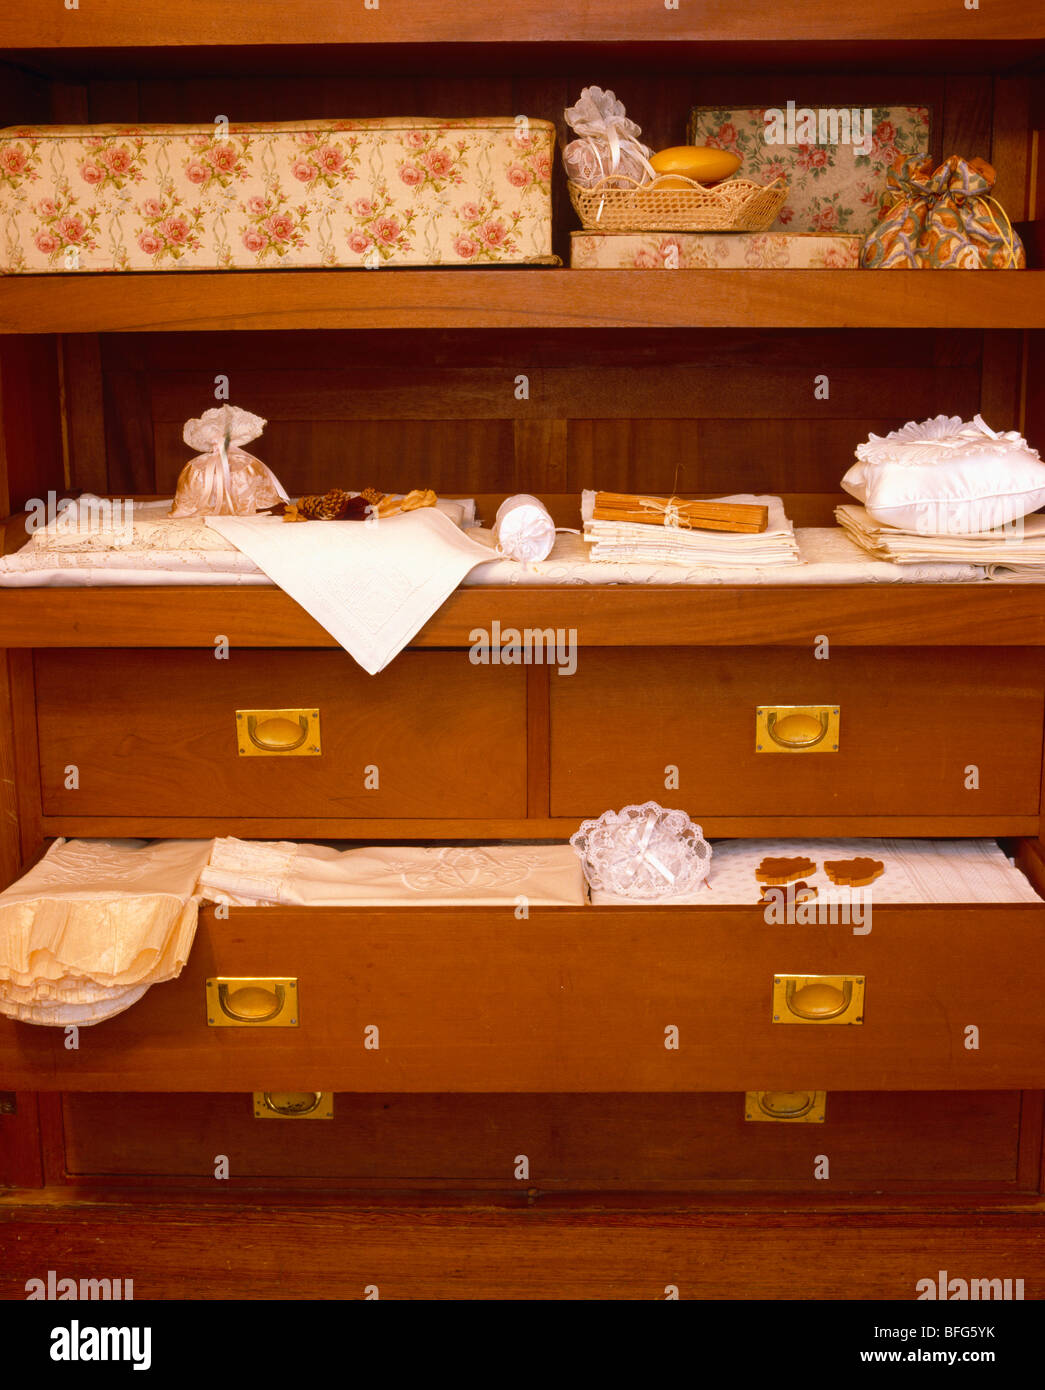 Close-up of floral boxes on shelves and storage drawers with bedlinen Stock Photo